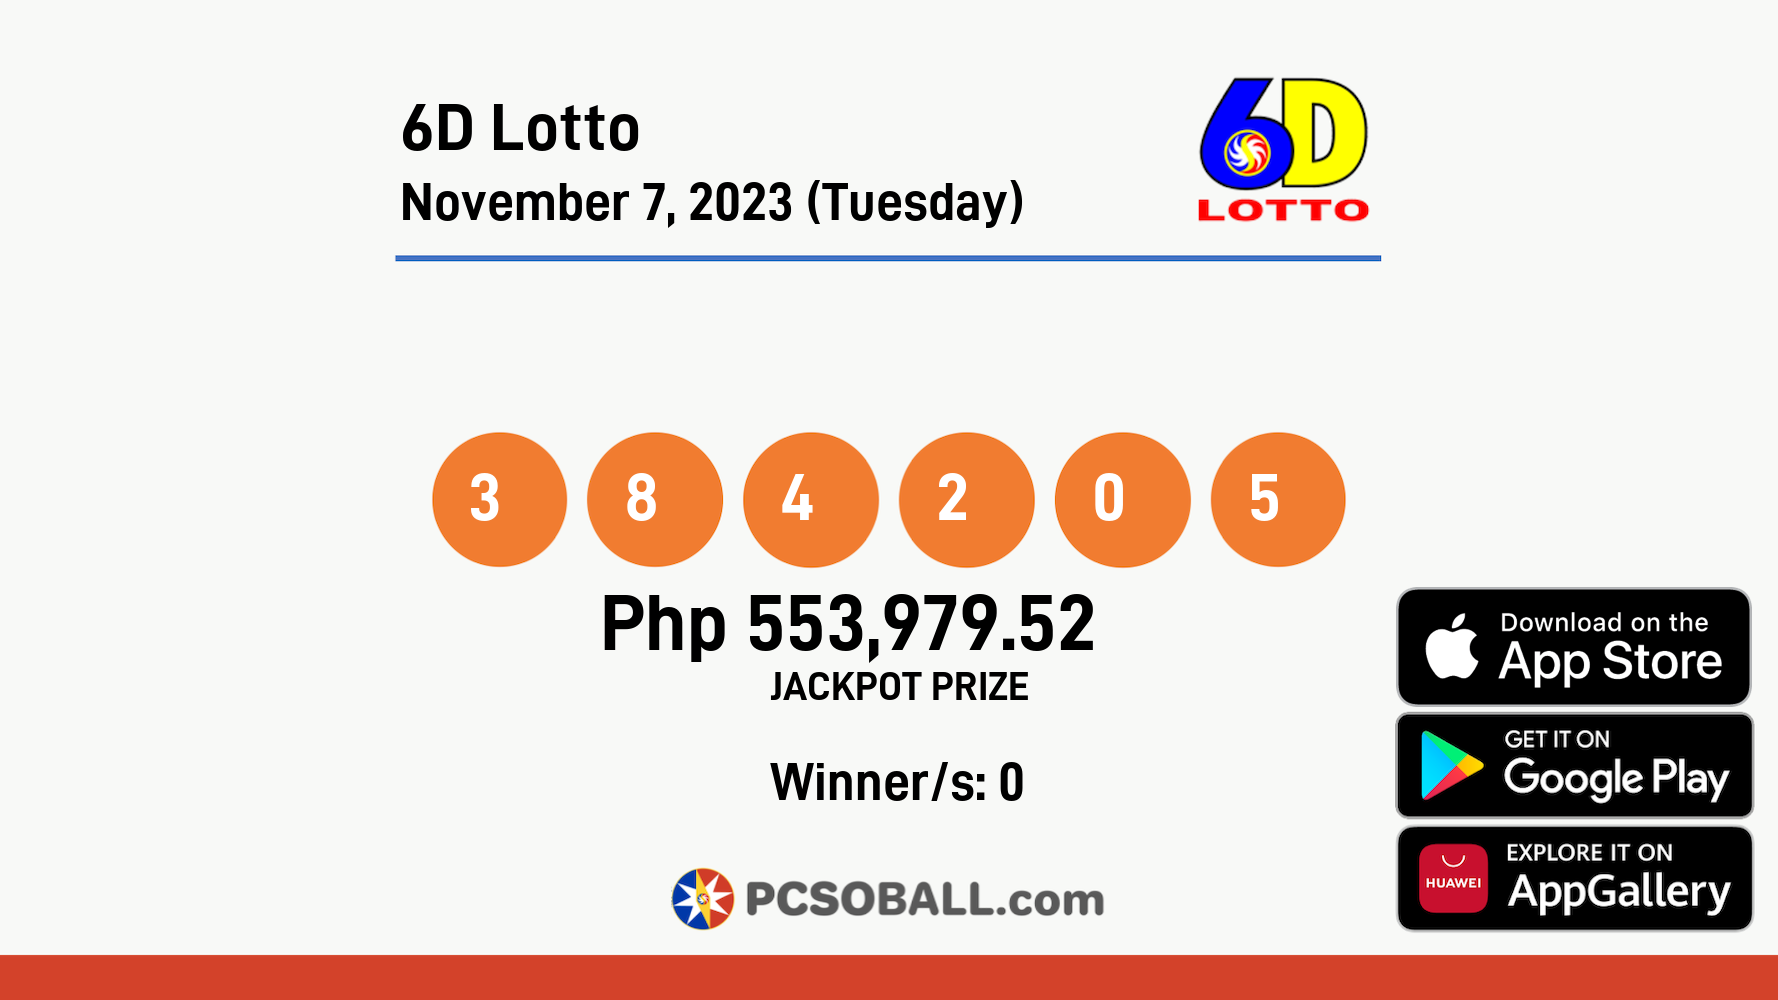 6D Lotto November 7, 2023 (Tuesday) Result